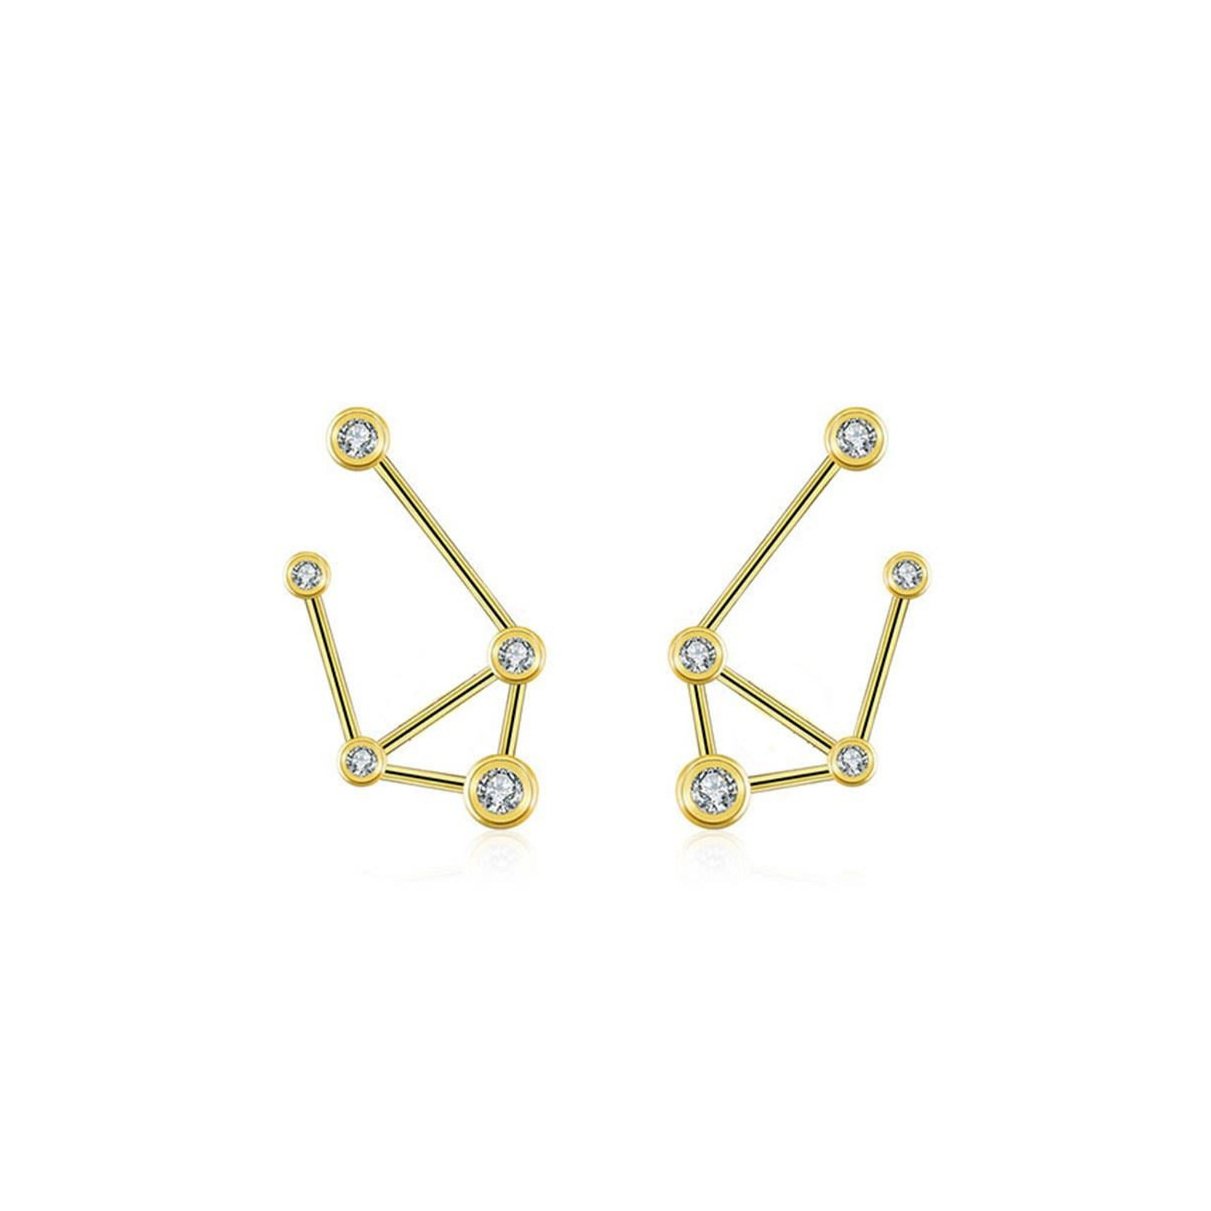 Genevieve Collection Gold and Diamond Libra Earrings, $793 at Wolf &amp; Badger